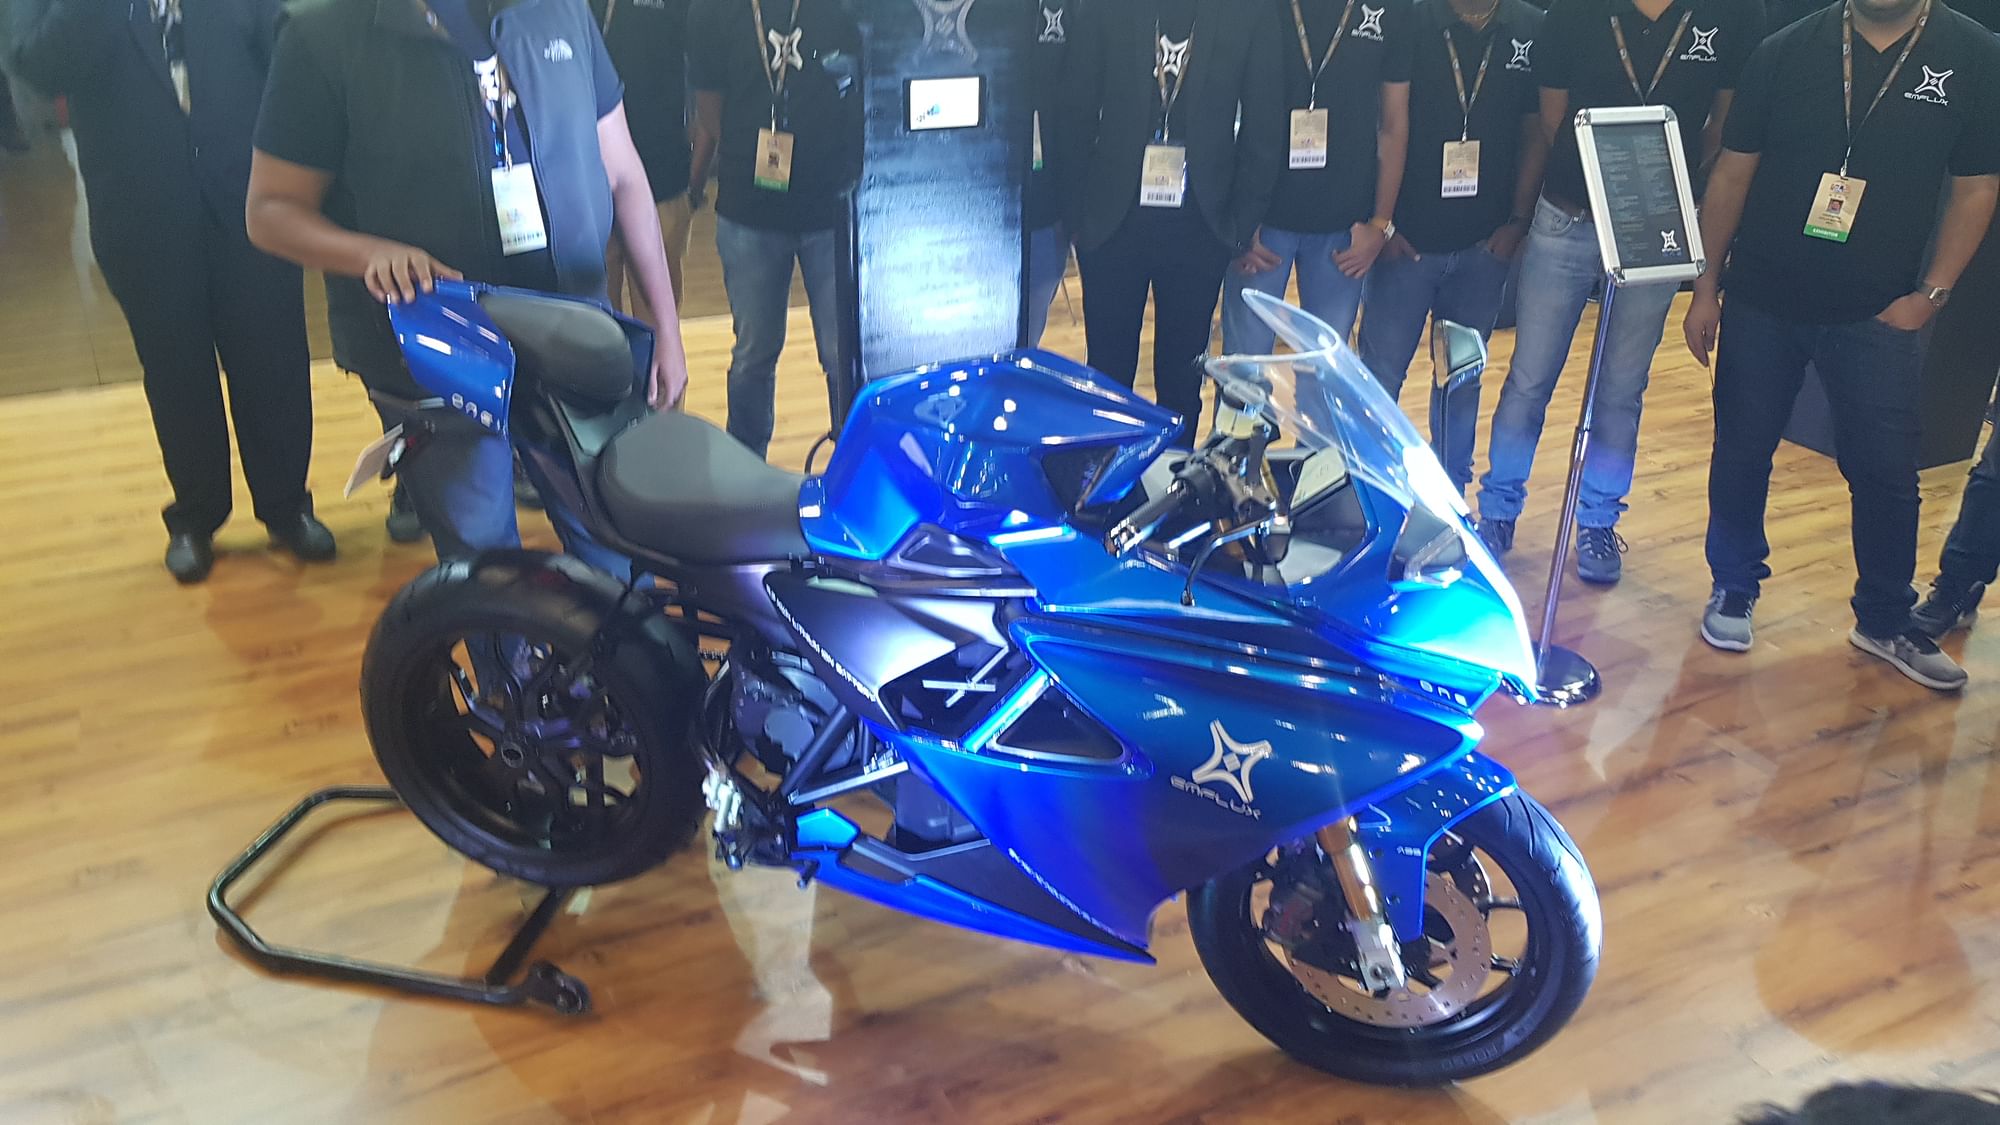 Emflux One unveiled at the Auto Expo 2018.&nbsp;